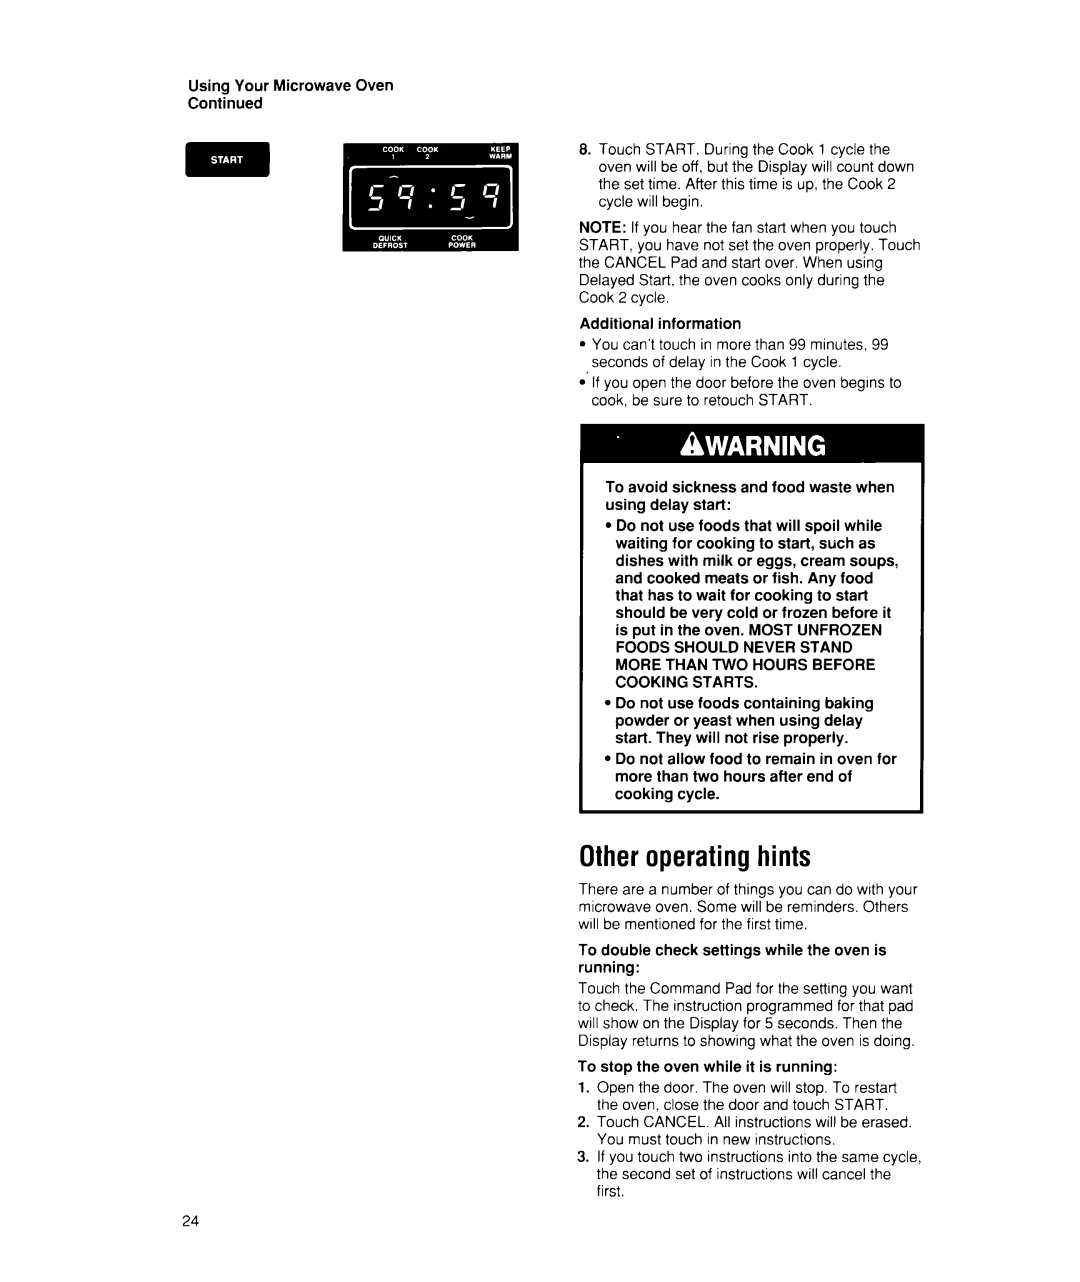 Whirlpool MW7400XW manual Other operating hints 